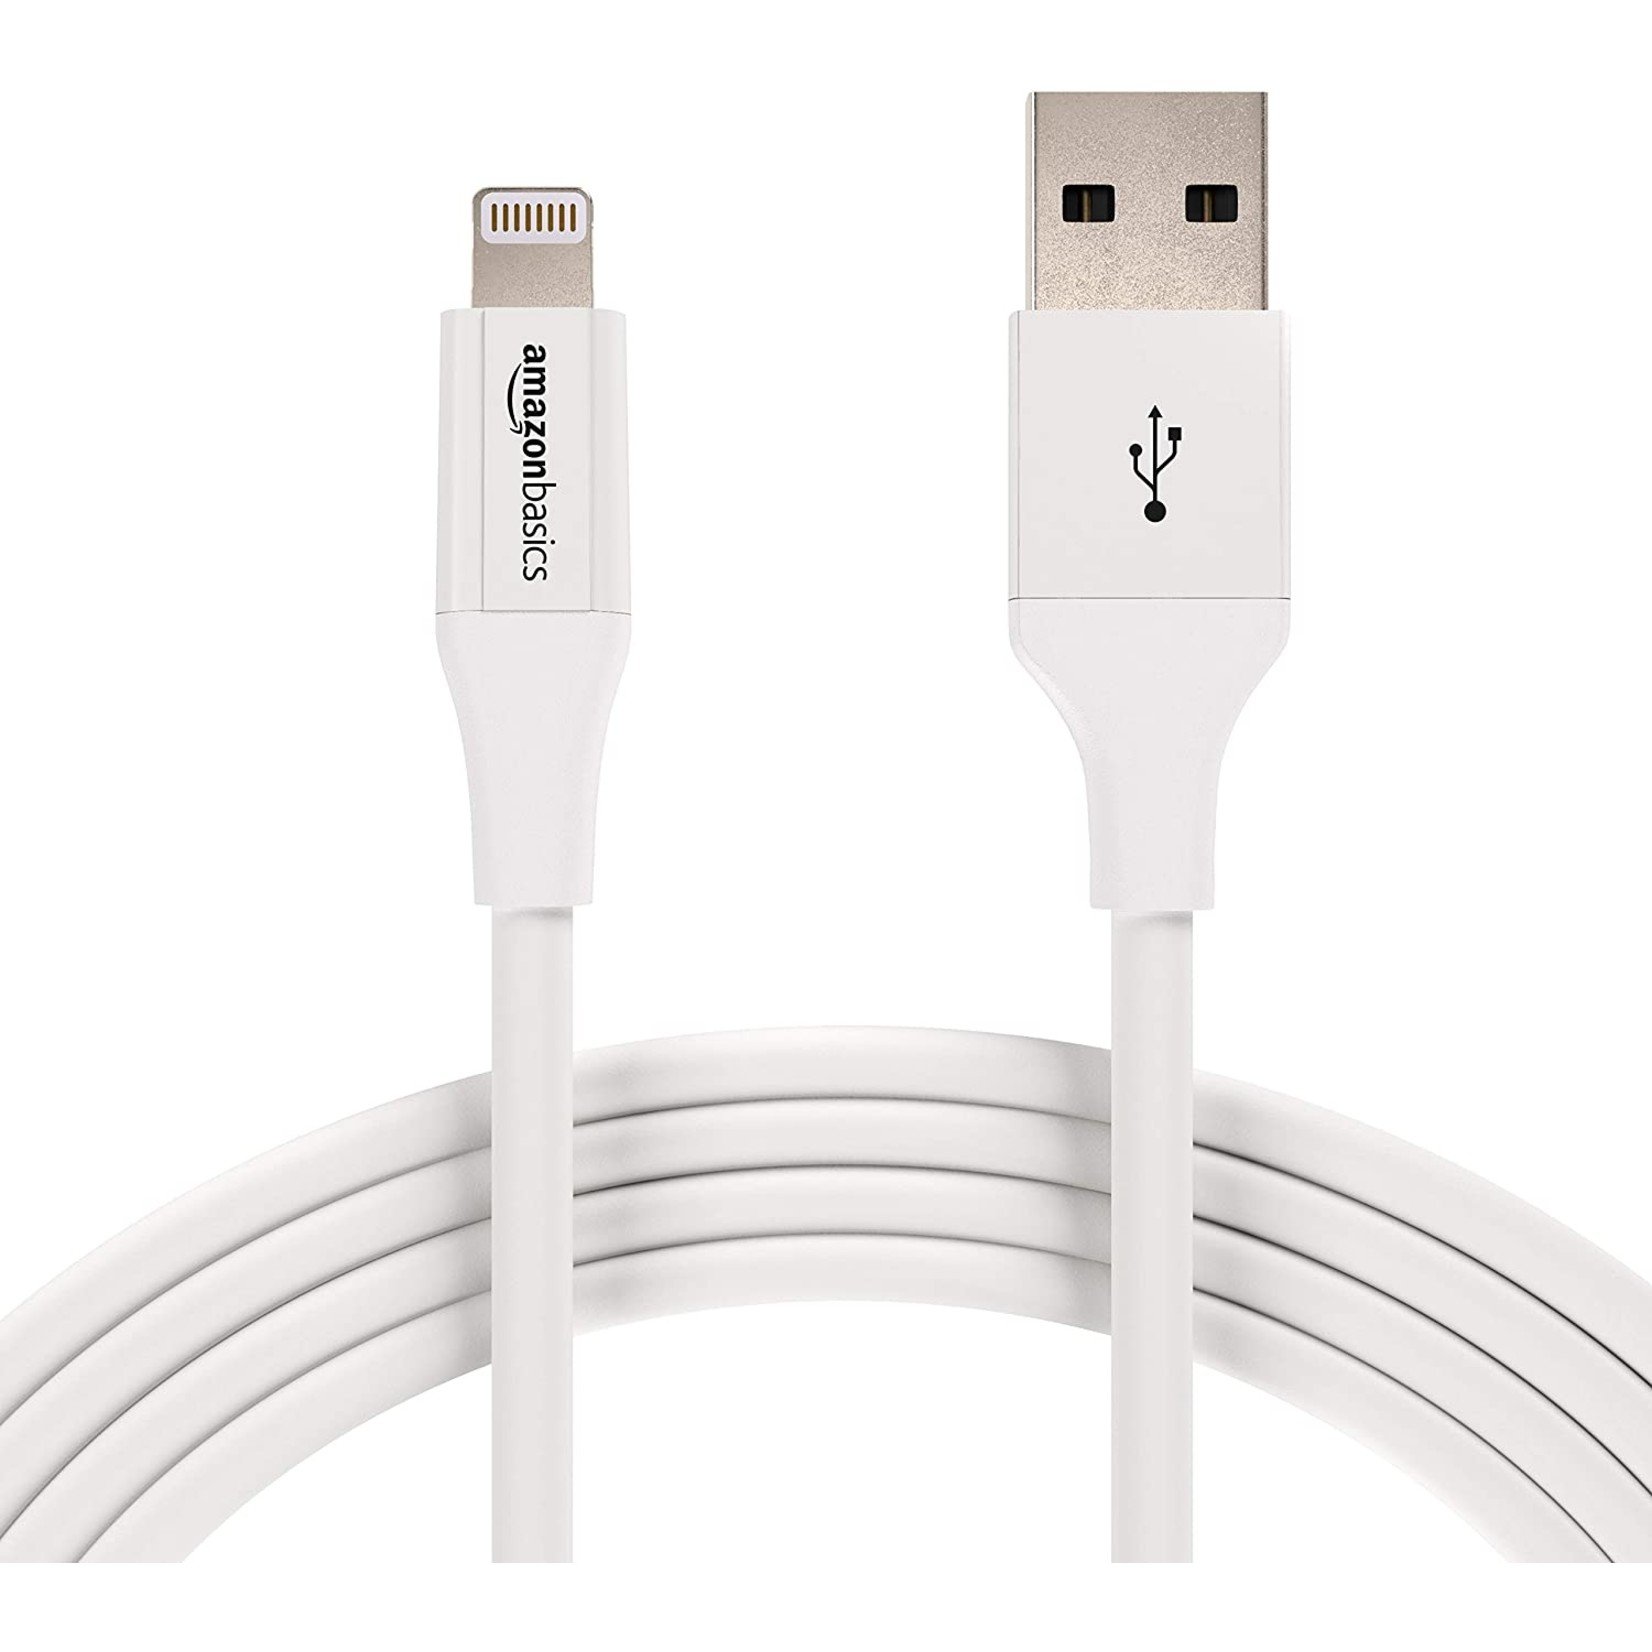 AMAZON AmazonBasics Lightning to USB A Cable, MFi Certified iPhone Charger, White, 10 Foot